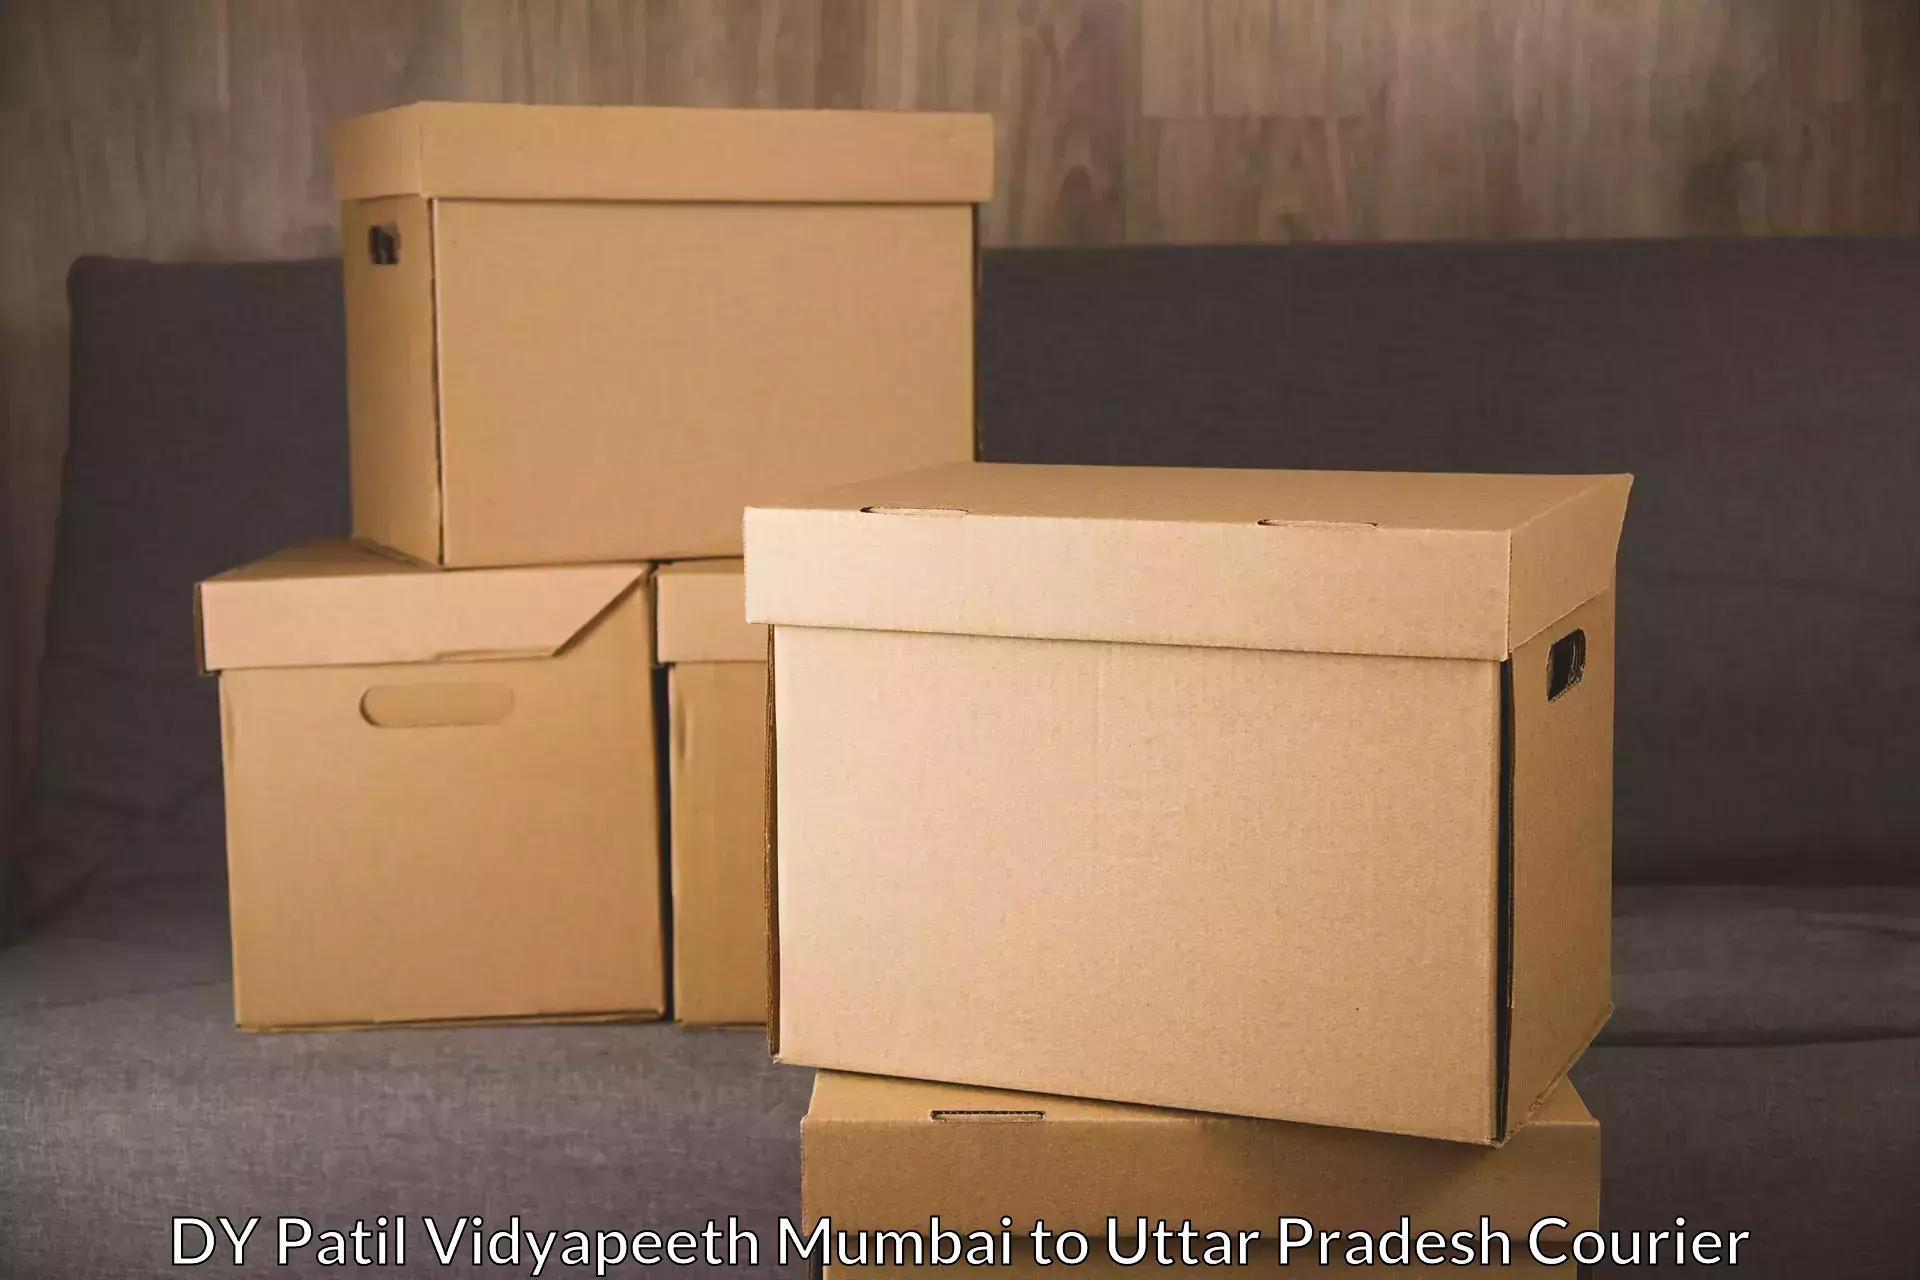 Advanced freight services DY Patil Vidyapeeth Mumbai to Bareilly